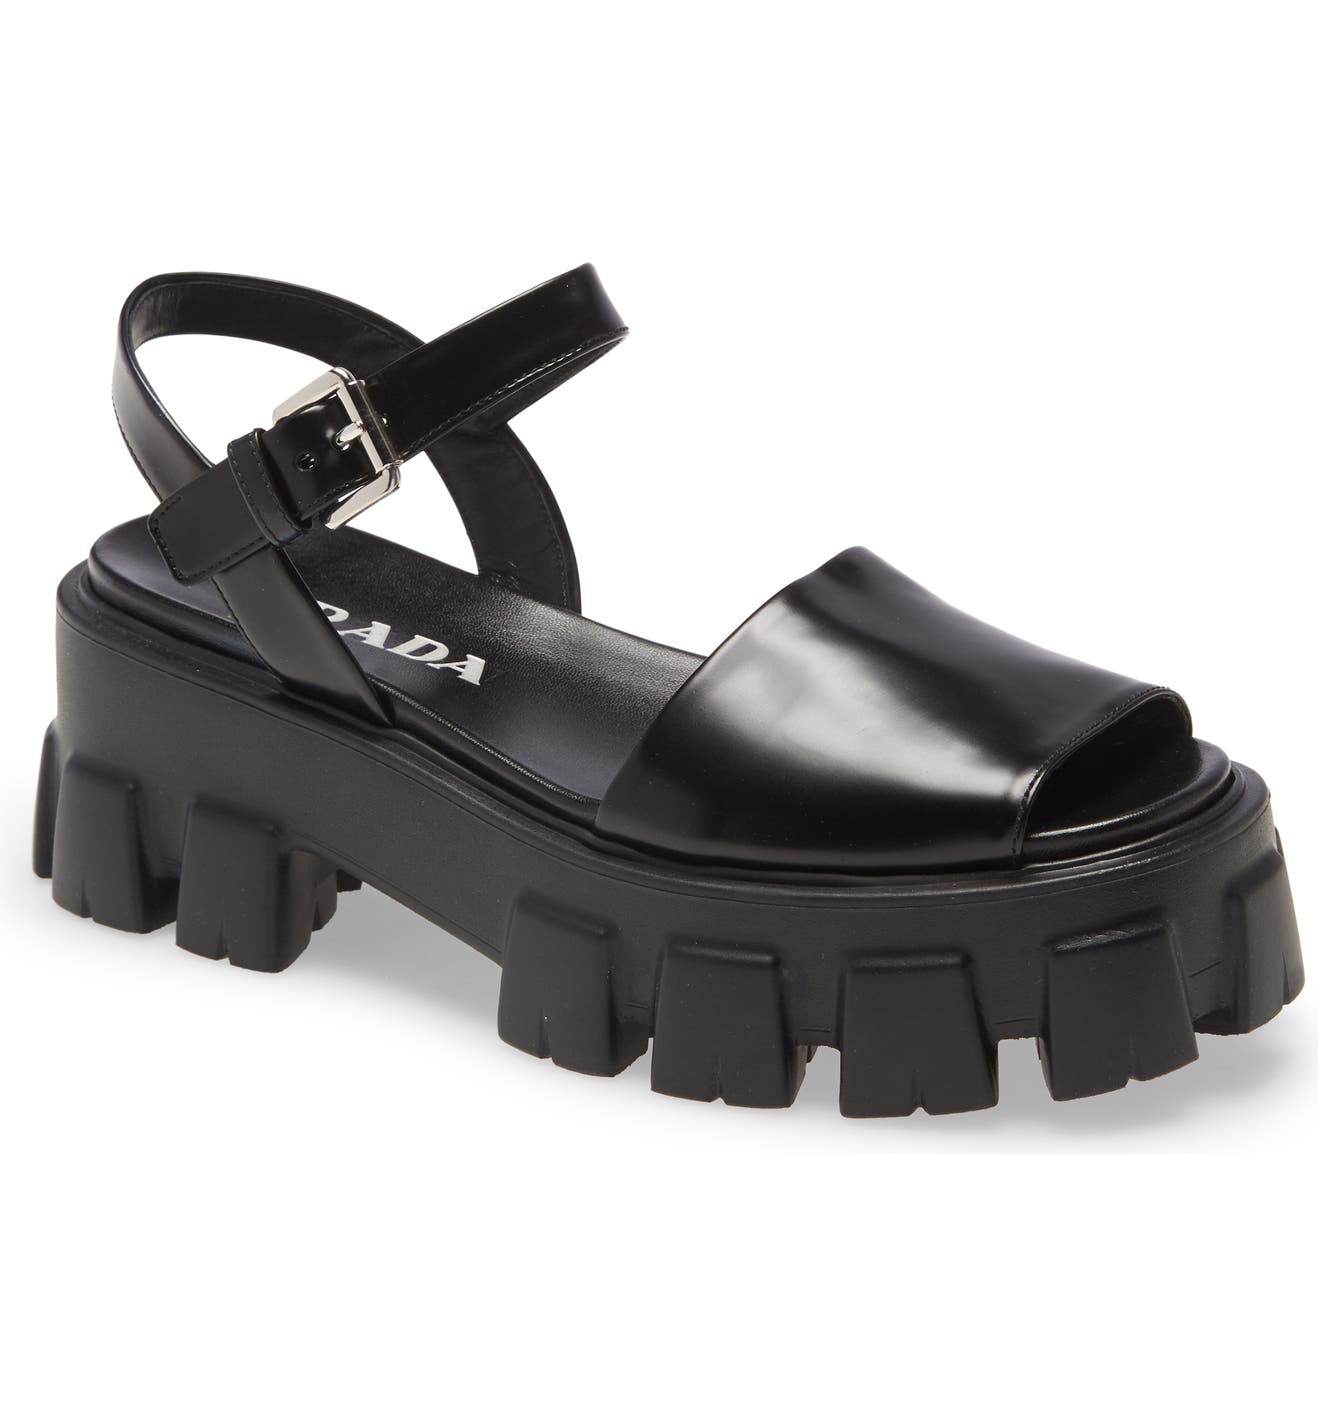 Chunky Sandals Are Back